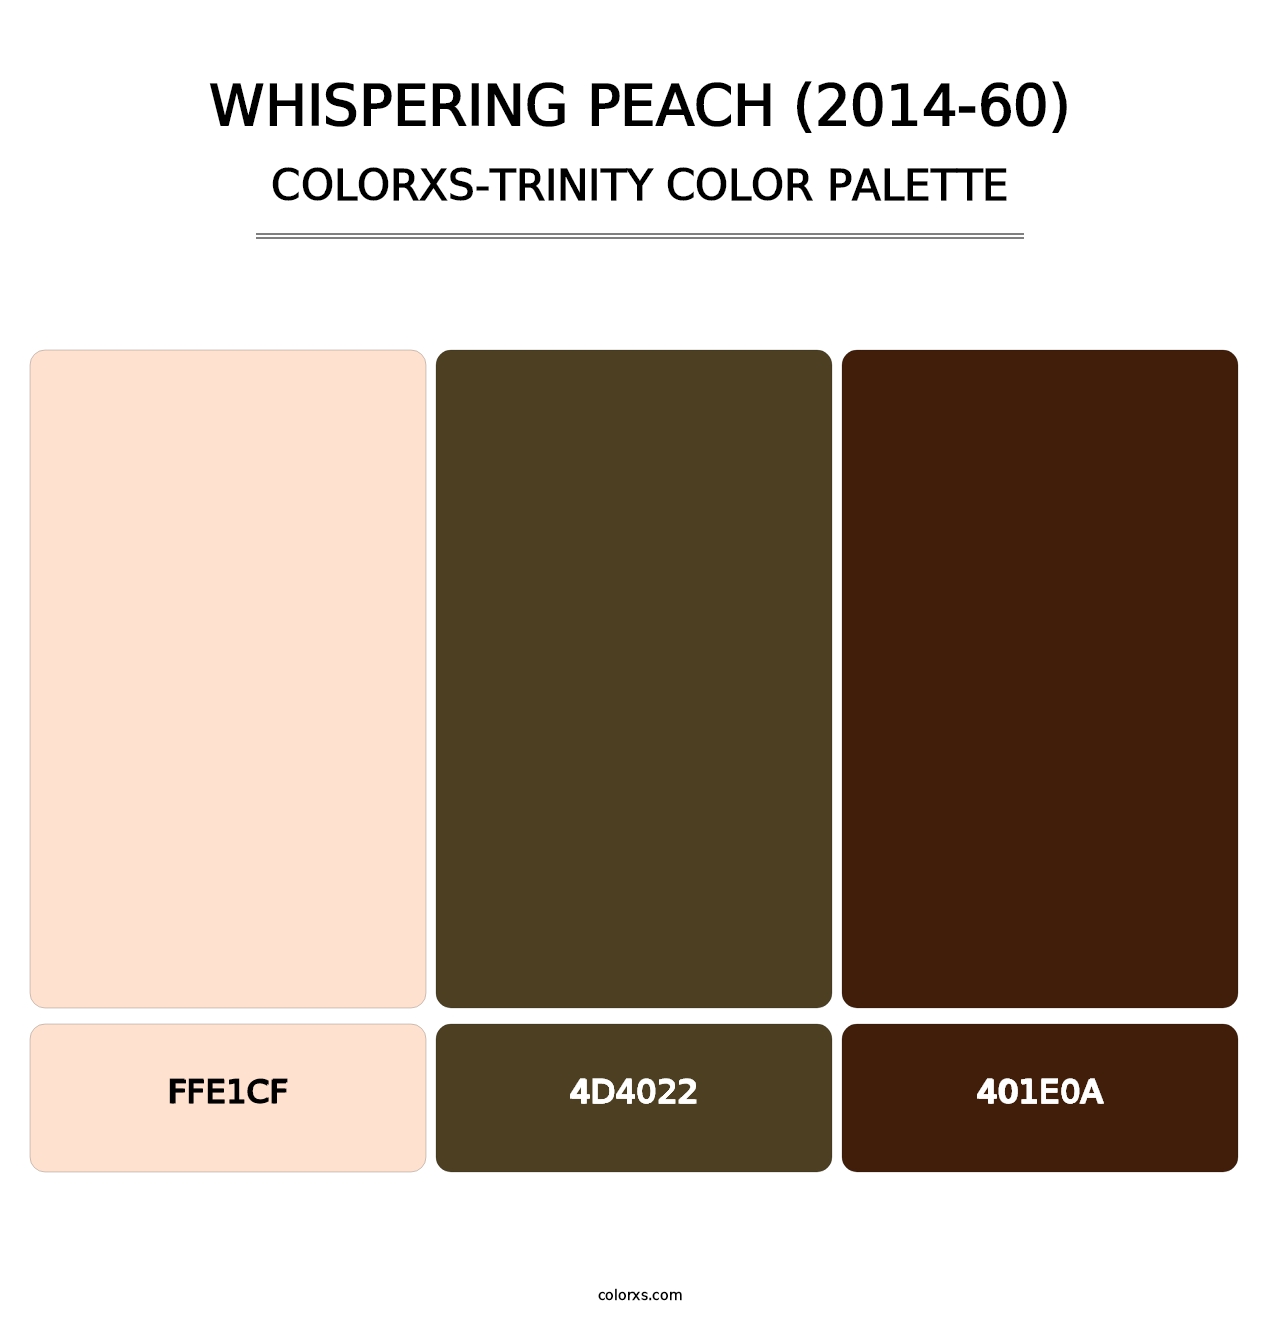 Whispering Peach (2014-60) - Colorxs Trinity Palette